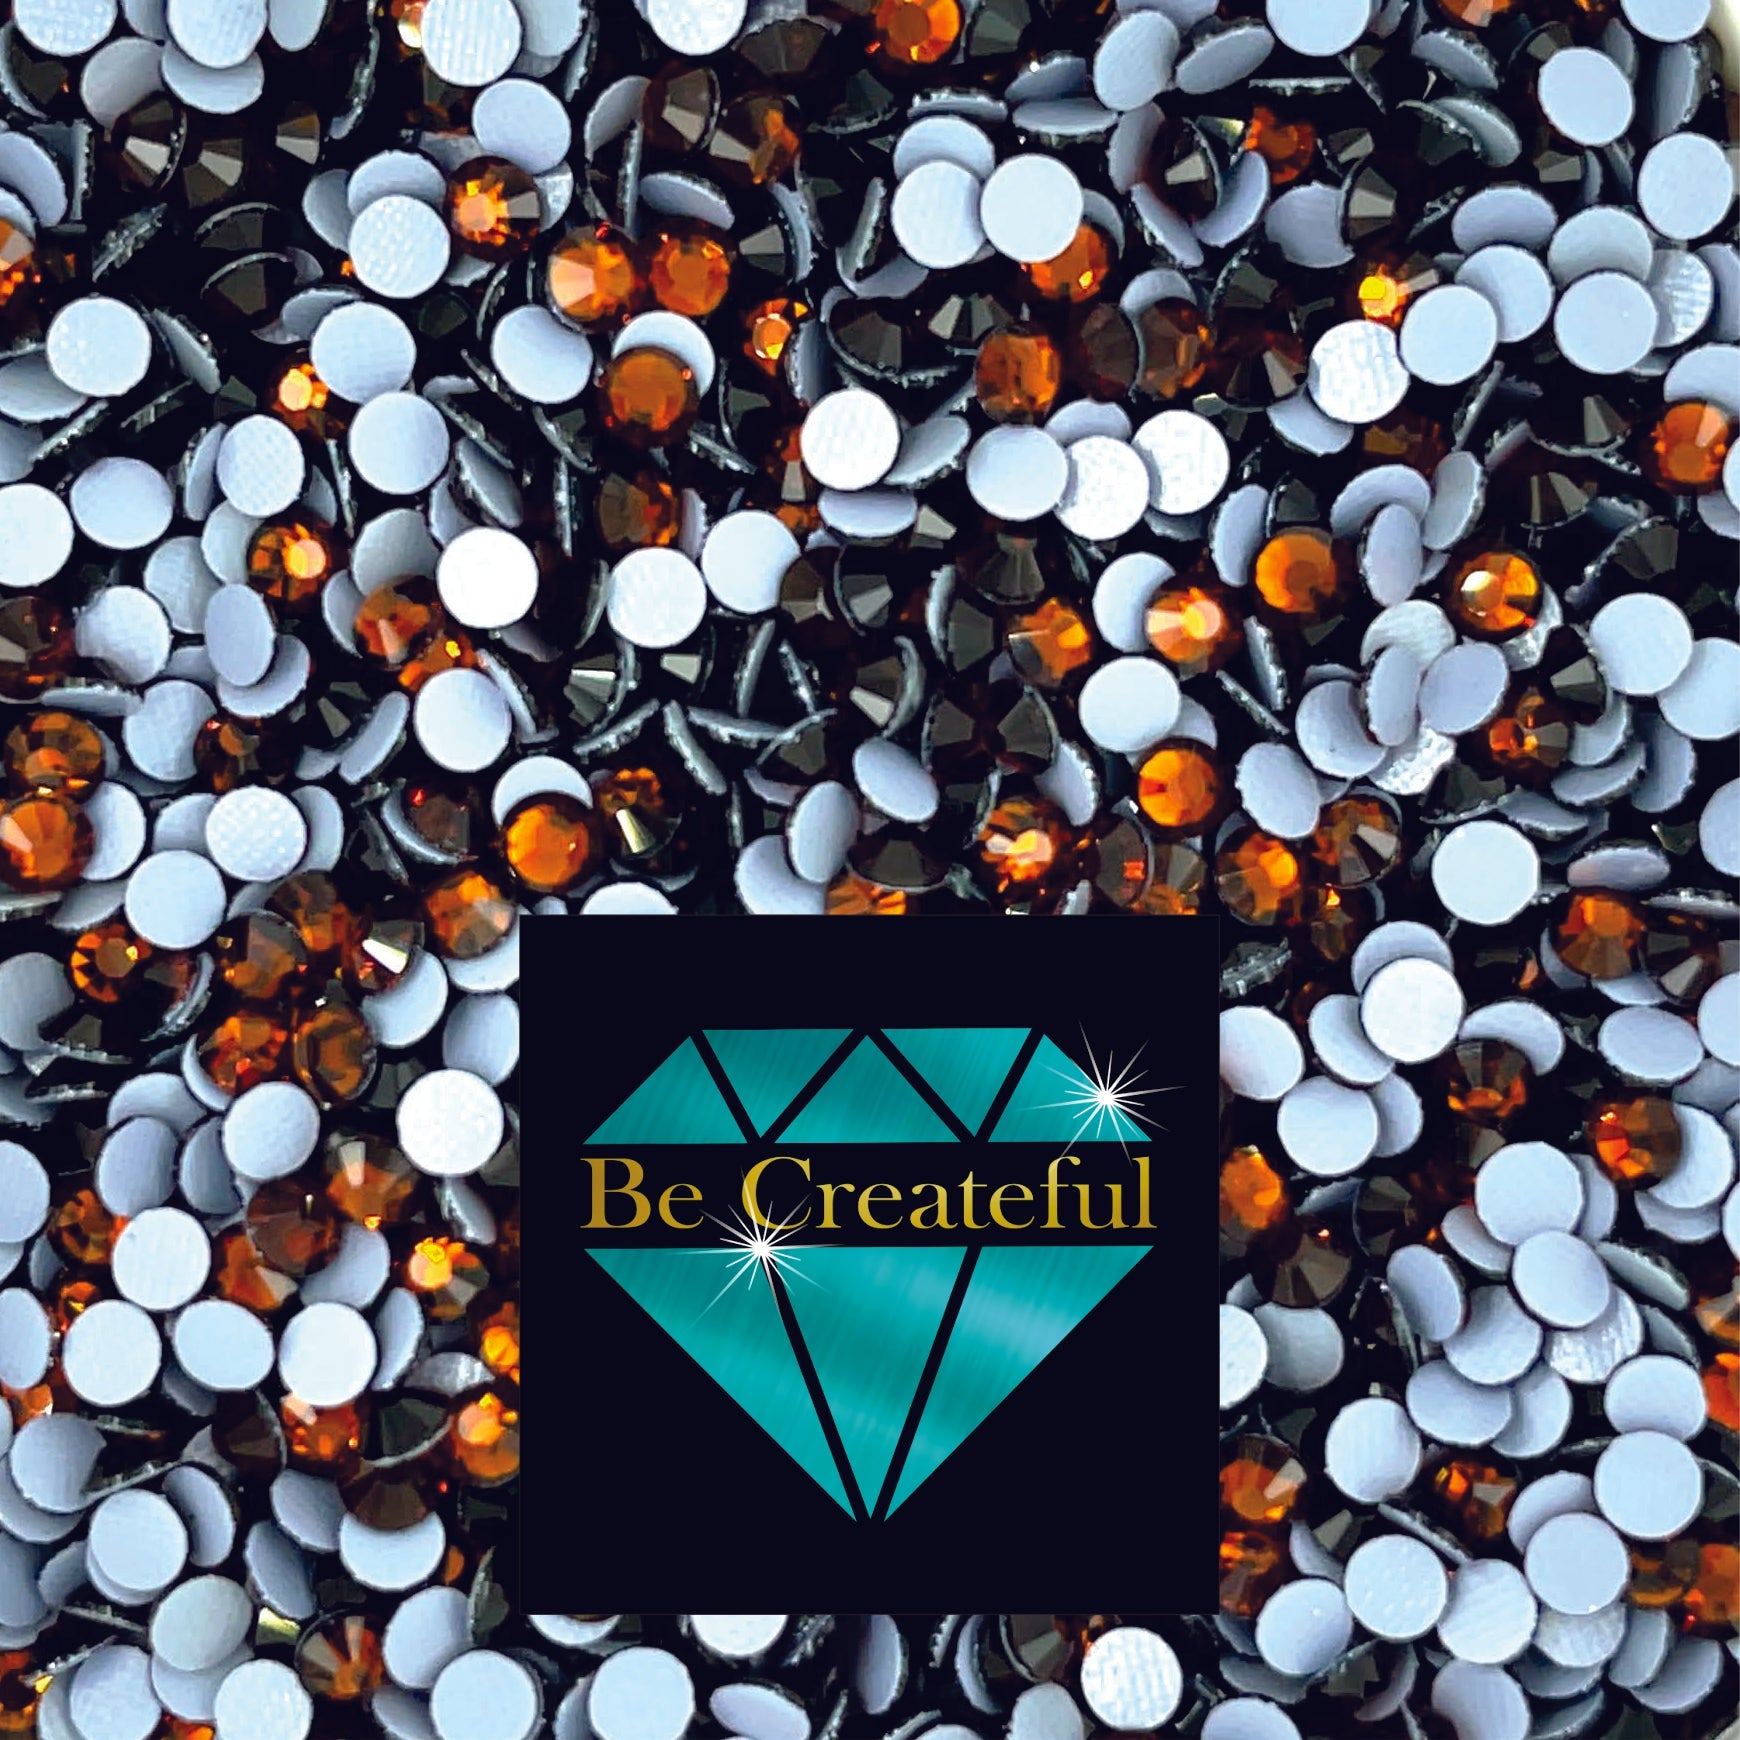 Be Createful Hotfix LUXE® Coffee Dark Topaz Glass Rhinestones are high-quality 14-16 facet glass Rhinestones that provide intense sparkle and refraction. LUXE® Hotfix rhinestones are known for their brilliant sparkle, made possible with their precision-cut facets. LUXE® Rhinestones provide high-end sparkle without the high-end price. 